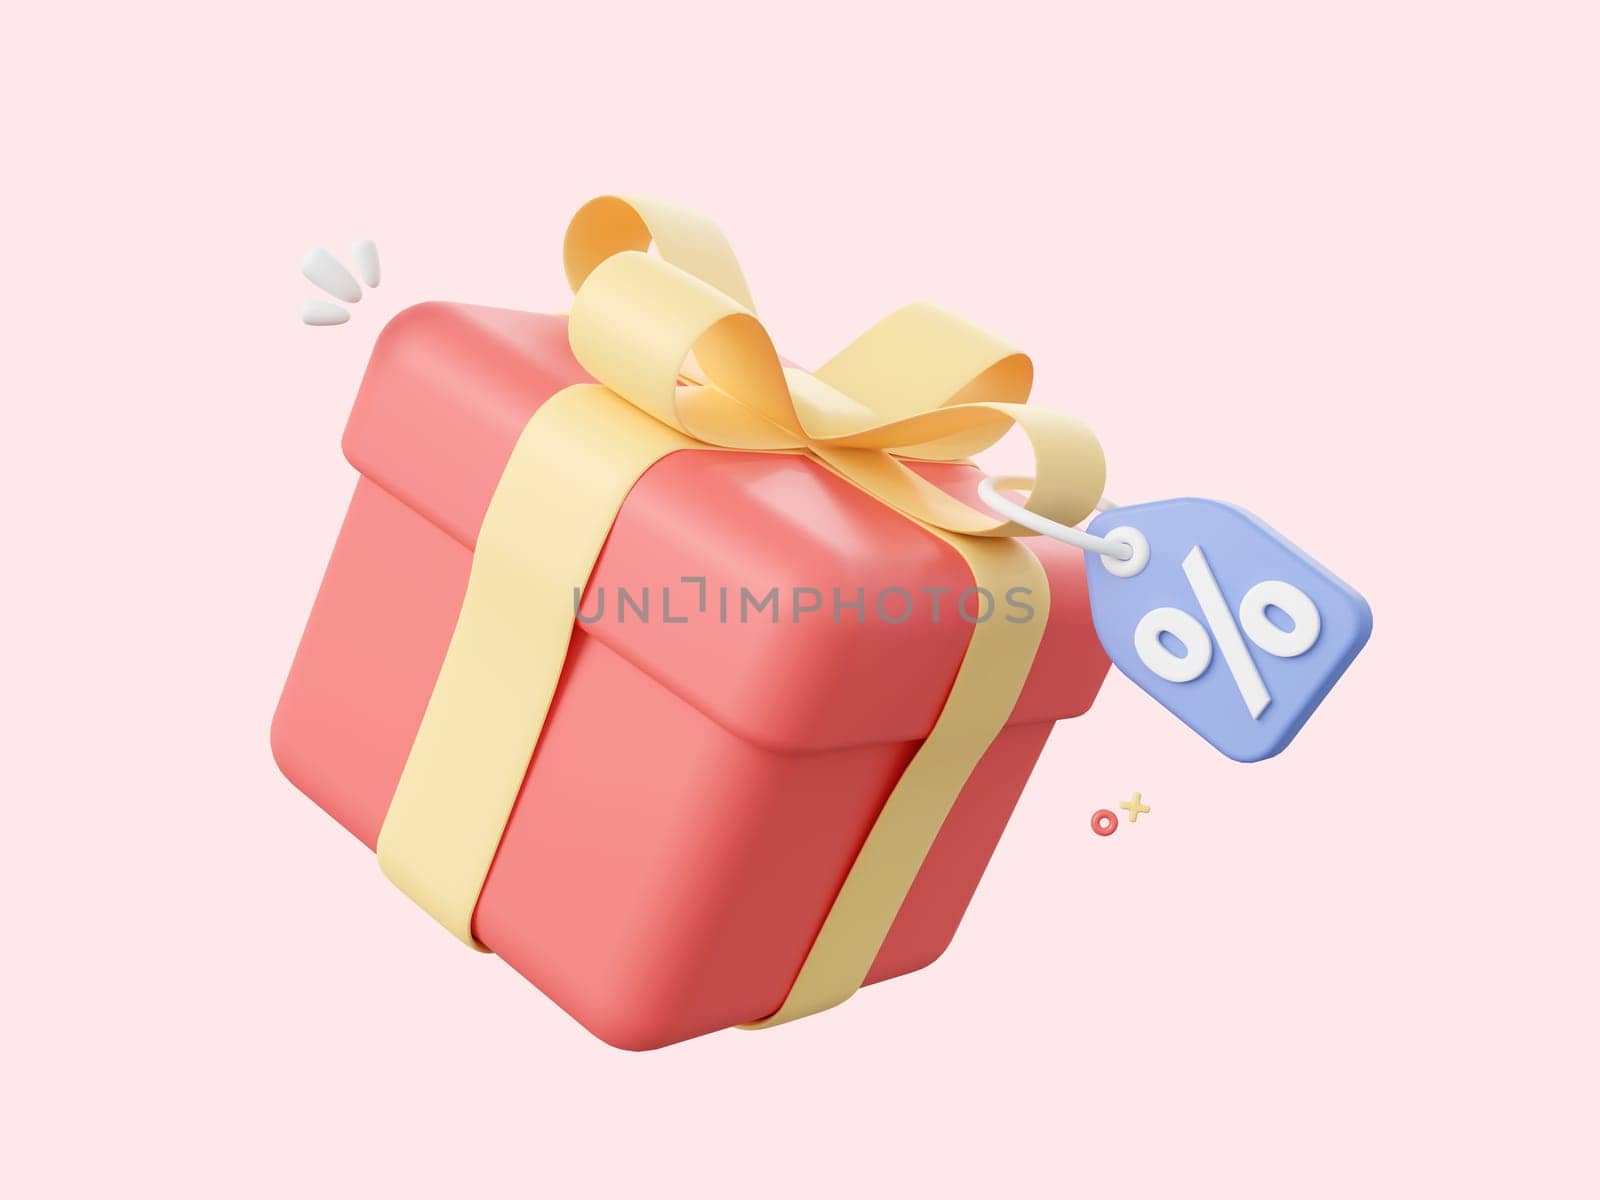 3d cartoon design illustration of Gift box with discount tag.